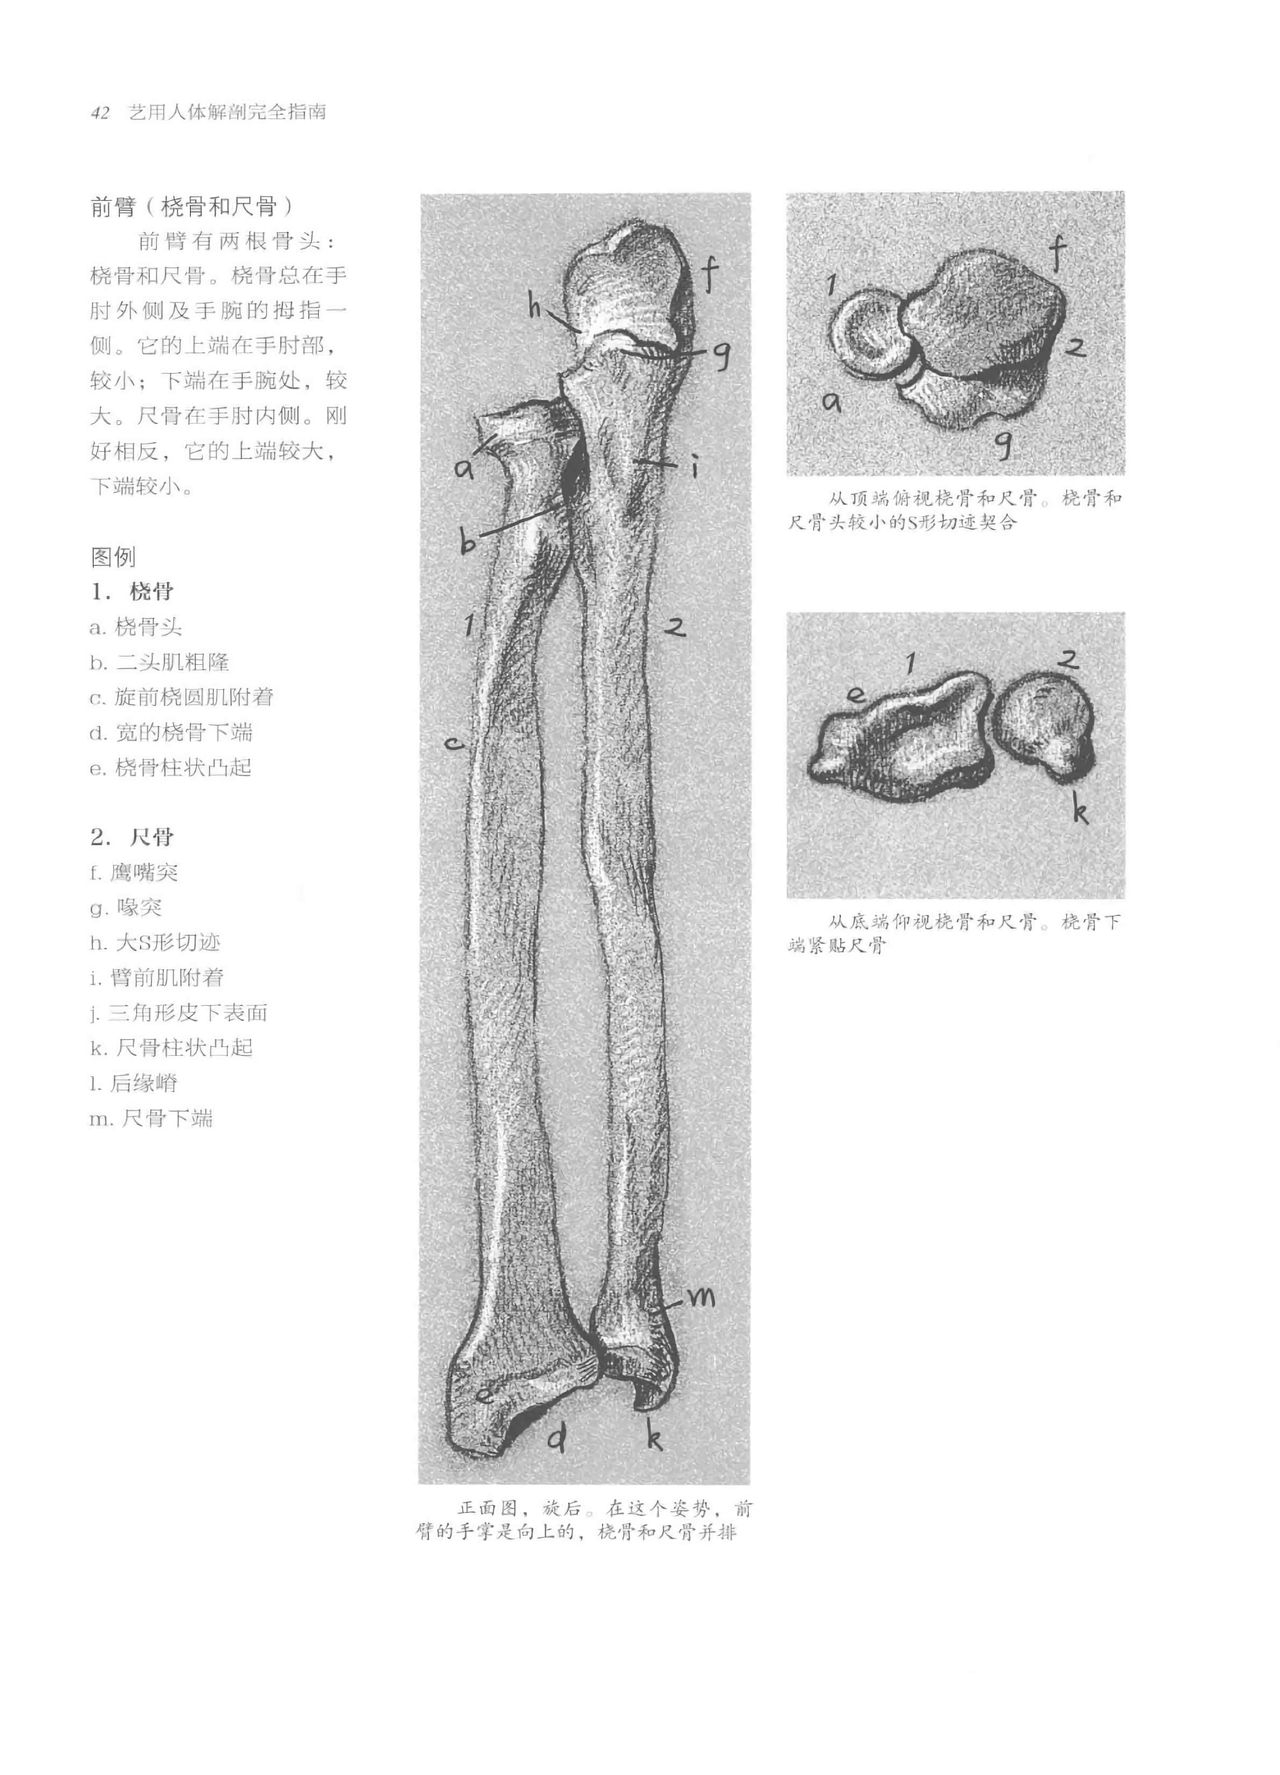 Anatomy-A Complete Guide for Artists - Joseph Sheppard [Chinese] 42